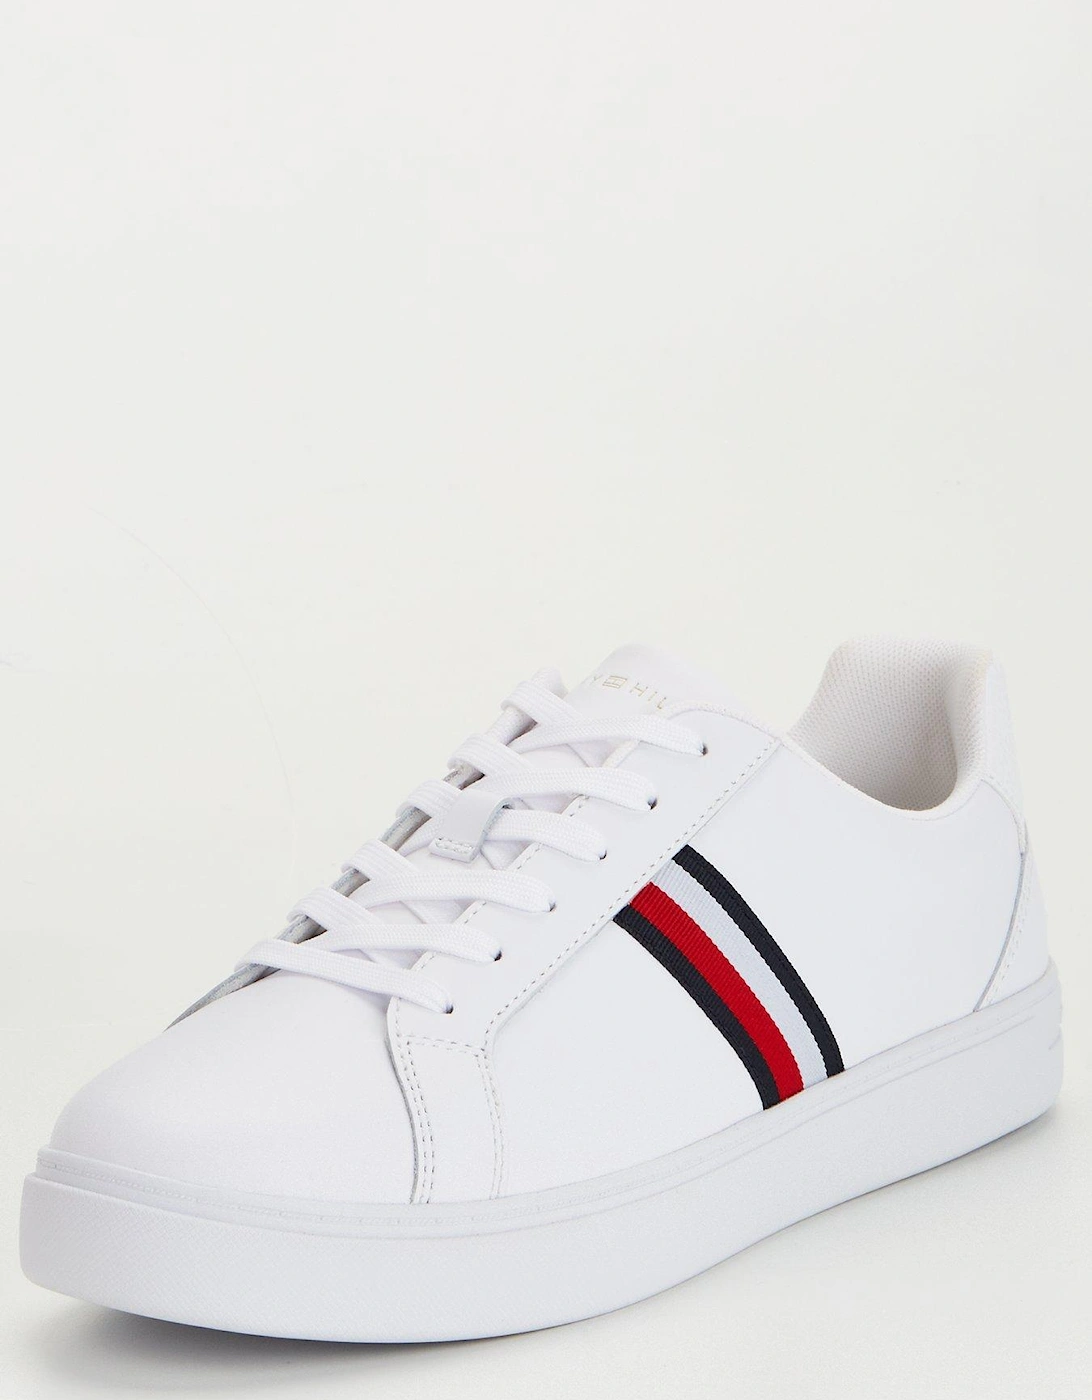 Essential Leather Court Trainers - White